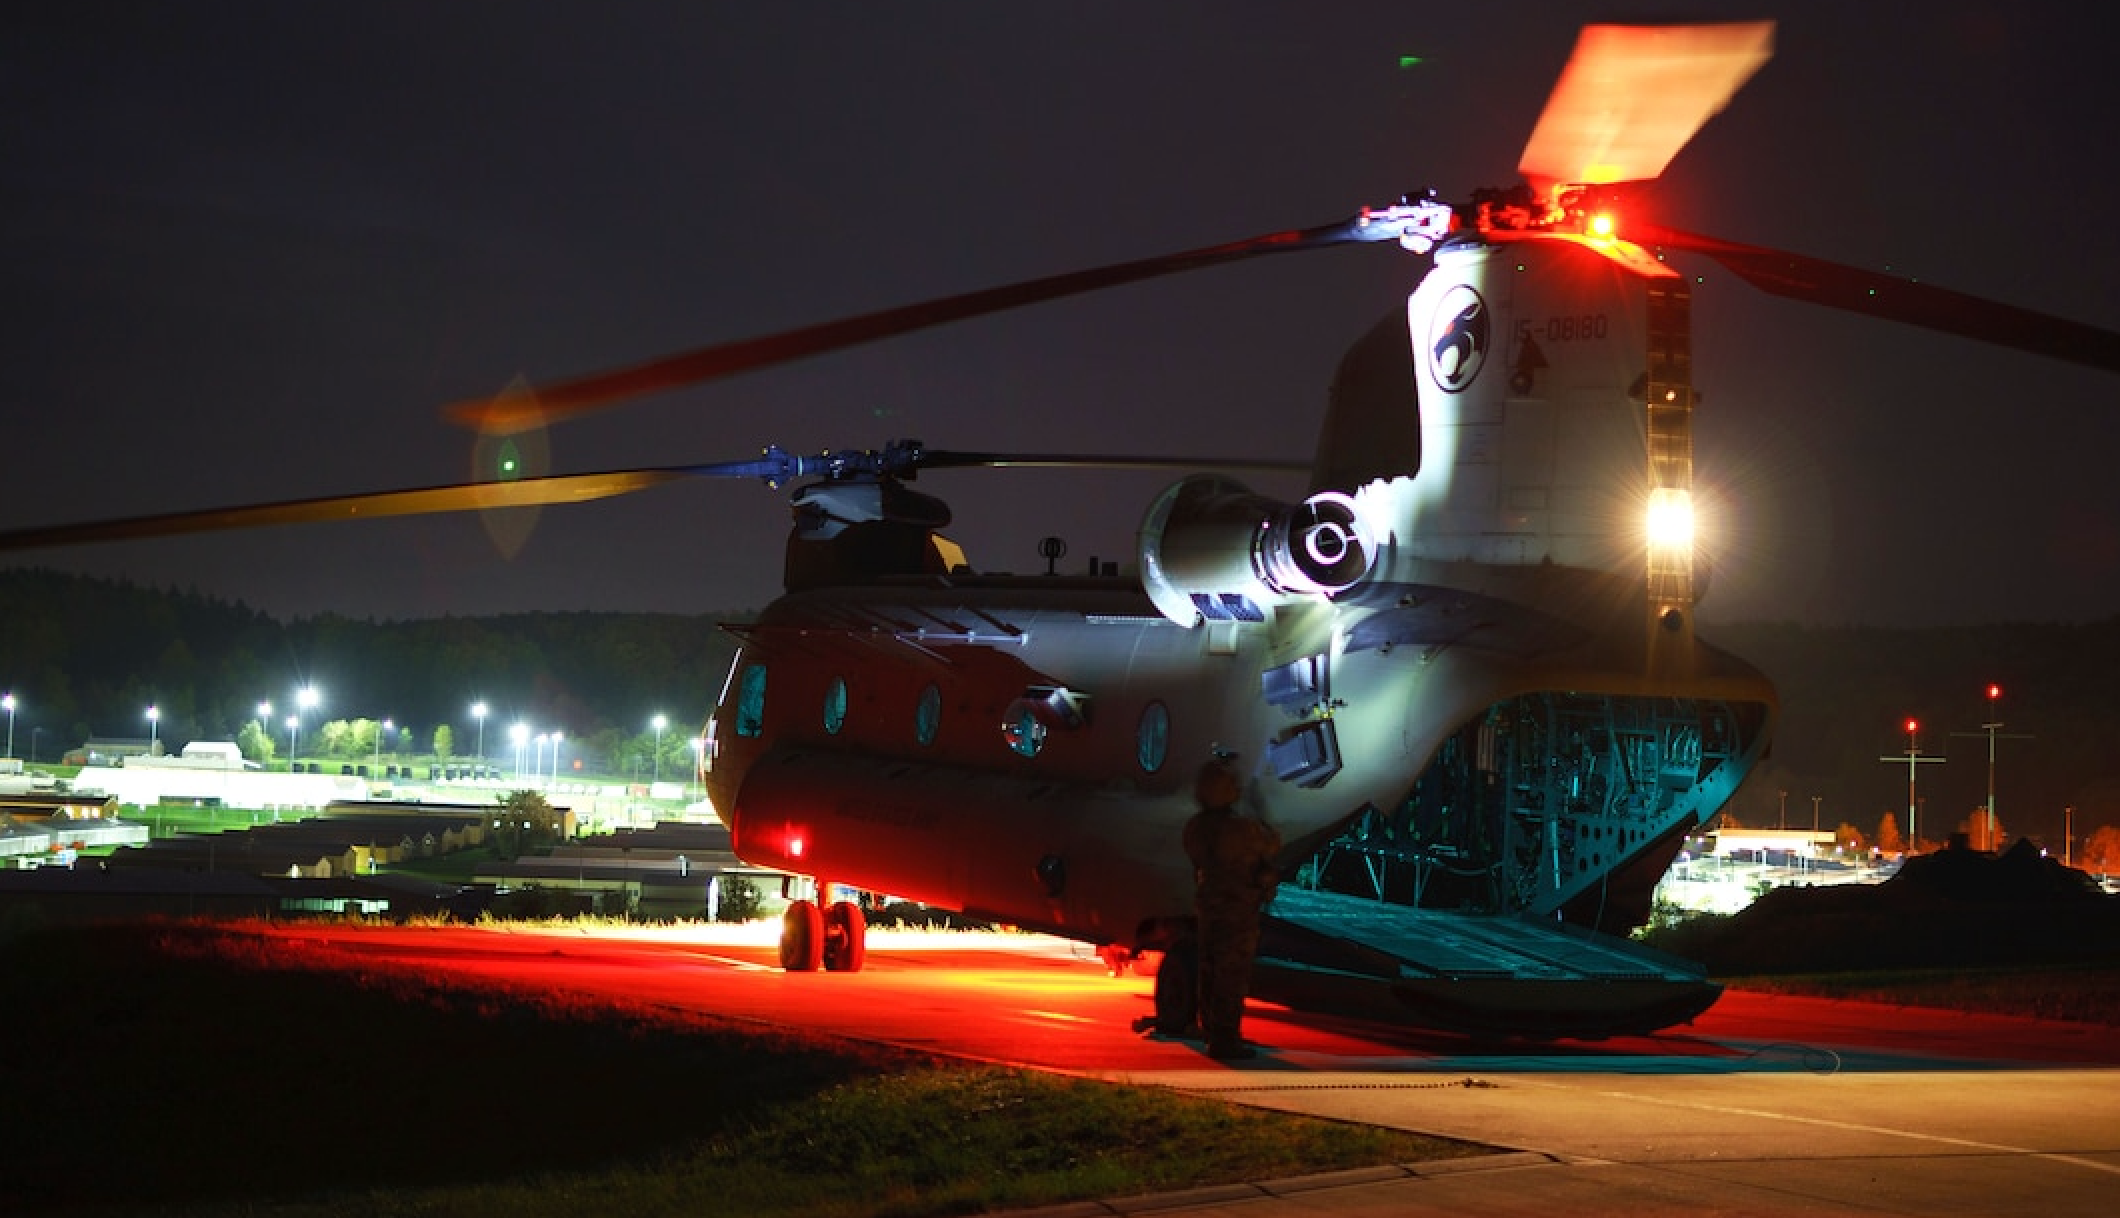 U.S. Army Staff Sgt. Fitz Hall shines a light on the tail of a CH-47 Chinook helicopter during pre-flight checks